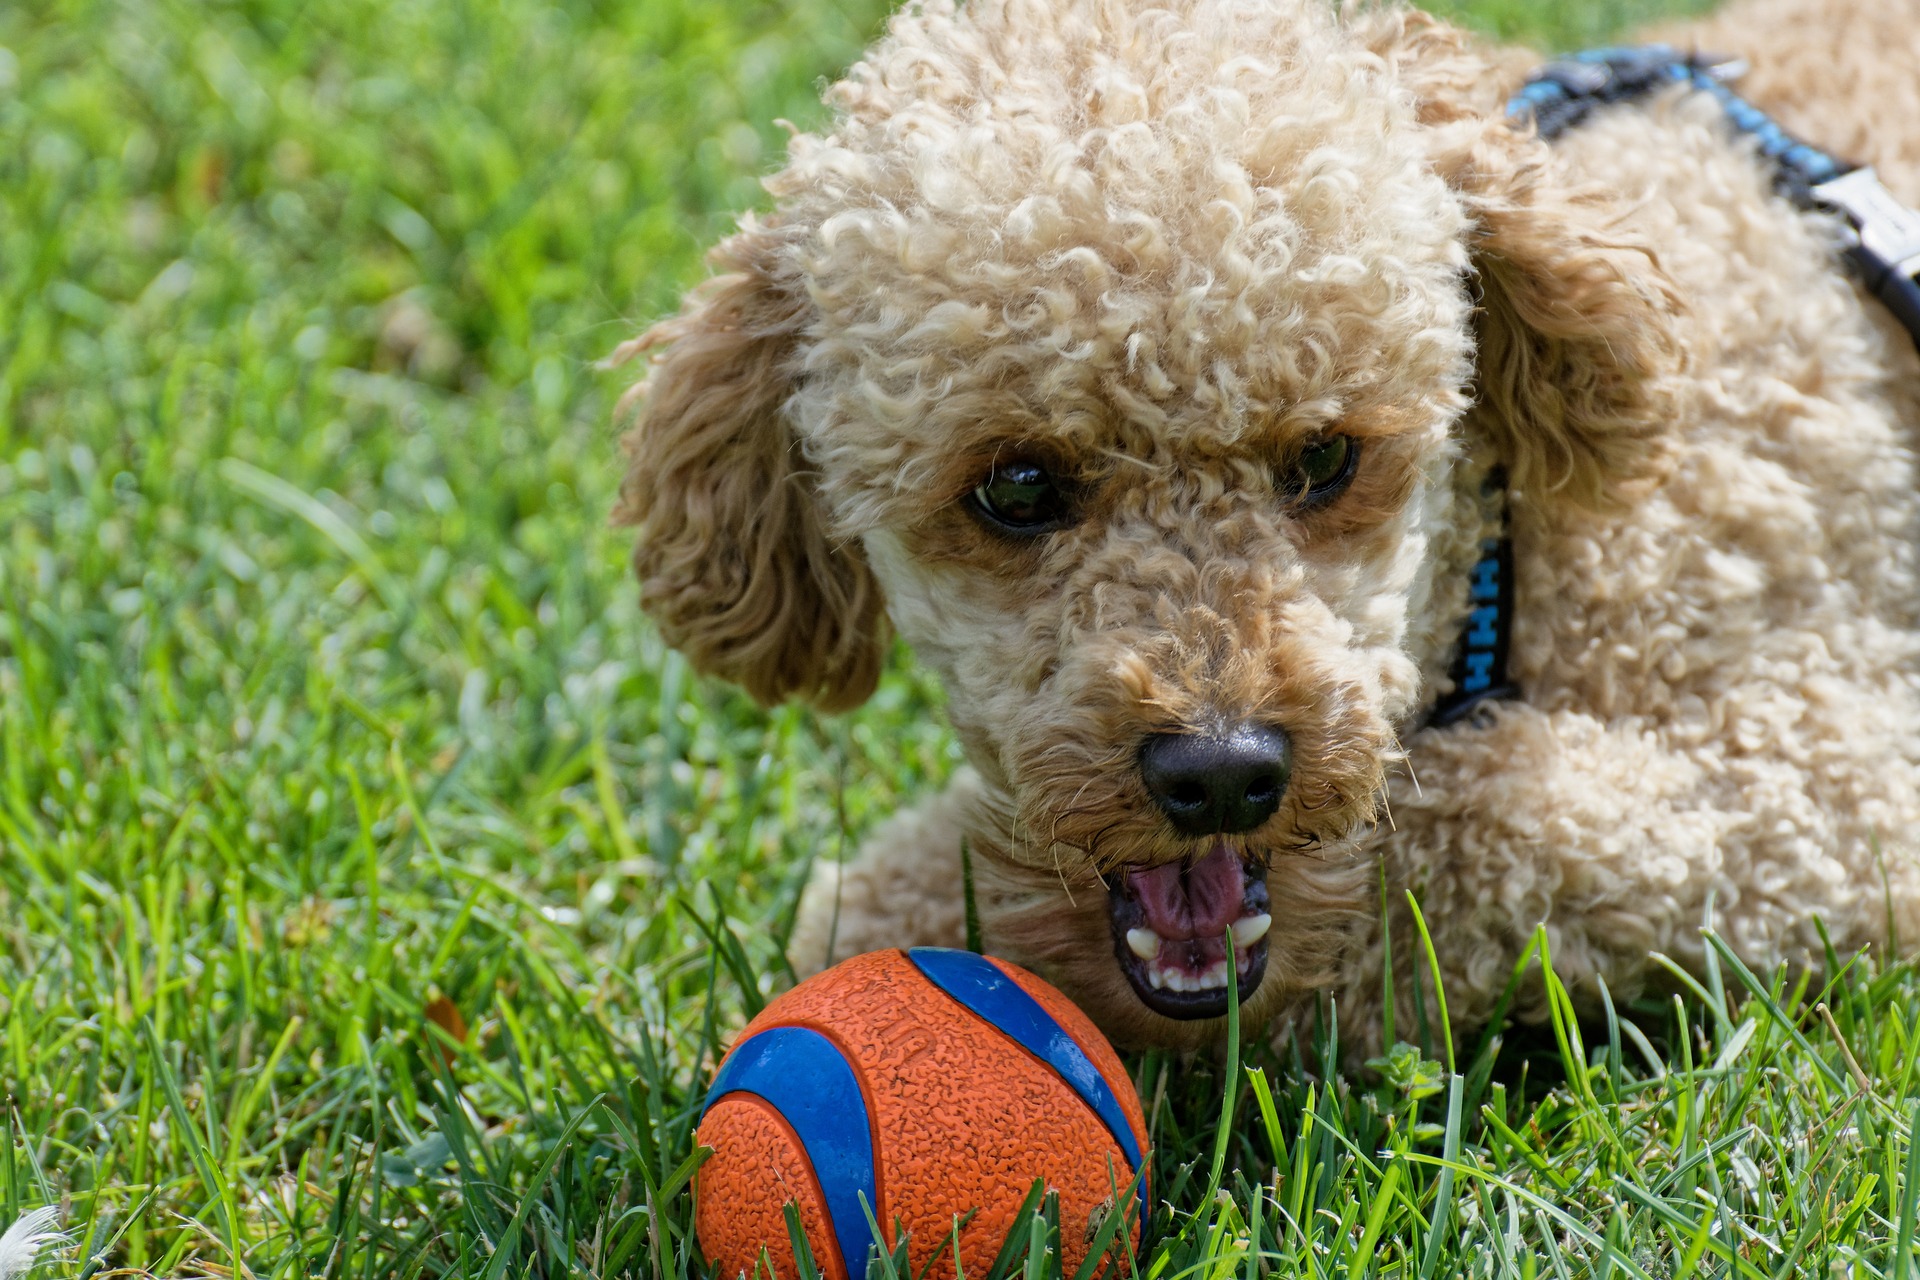 Poodle playing with a ball